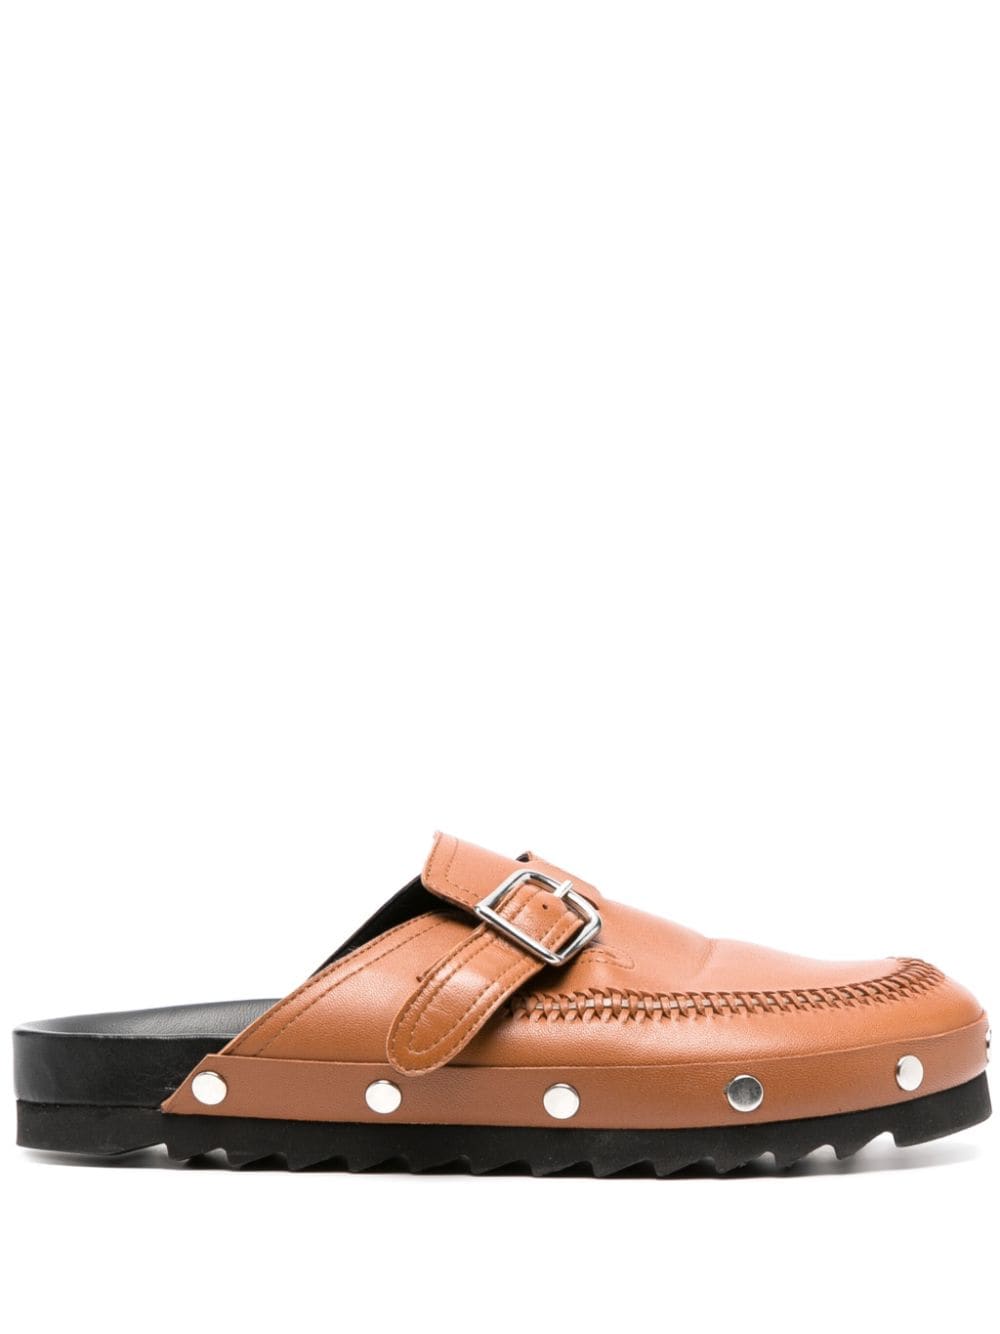 braided leather loafer clogs